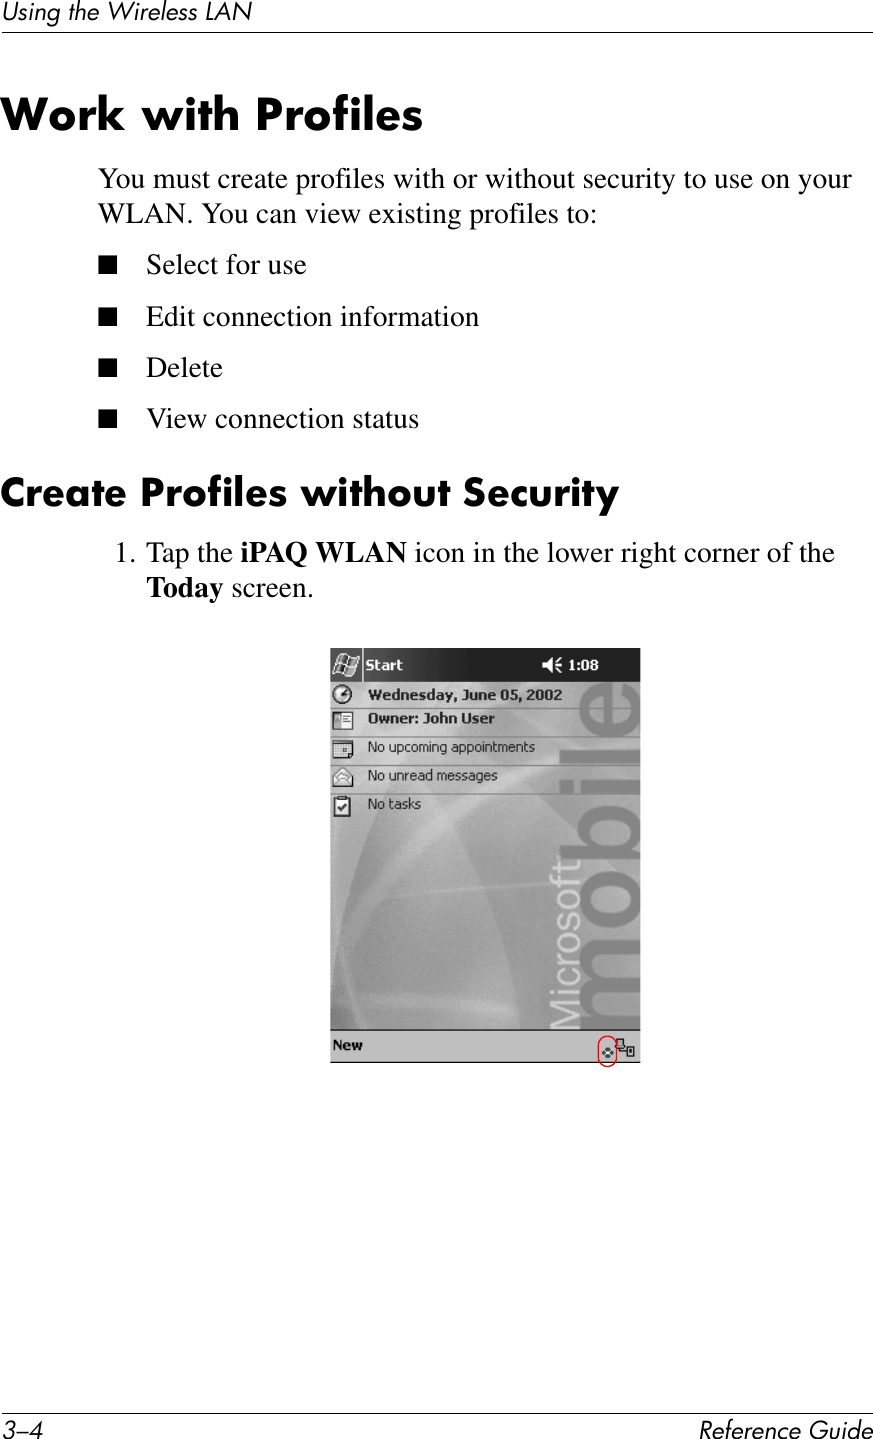 9/C !&quot;#&quot;$&quot;%&amp;&quot;&apos;()*+&quot;UL*%2&apos;1Q&quot;&apos;J*$&quot;K&quot;LL&apos;M&lt;N+6!T&amp;L)7?&amp;S!6#)@&quot;8You must create profiles with or without security to use on your WLAN. You can view existing profiles to:■Select for use■Edit connection information■Delete■View connection status2!&quot;;7&quot;&amp;S!6#)@&quot;8&amp;L)7?6(7&amp;:&quot;%(!)7O1. Tap the iPAQ WLAN icon in the lower right corner of the Today screen.